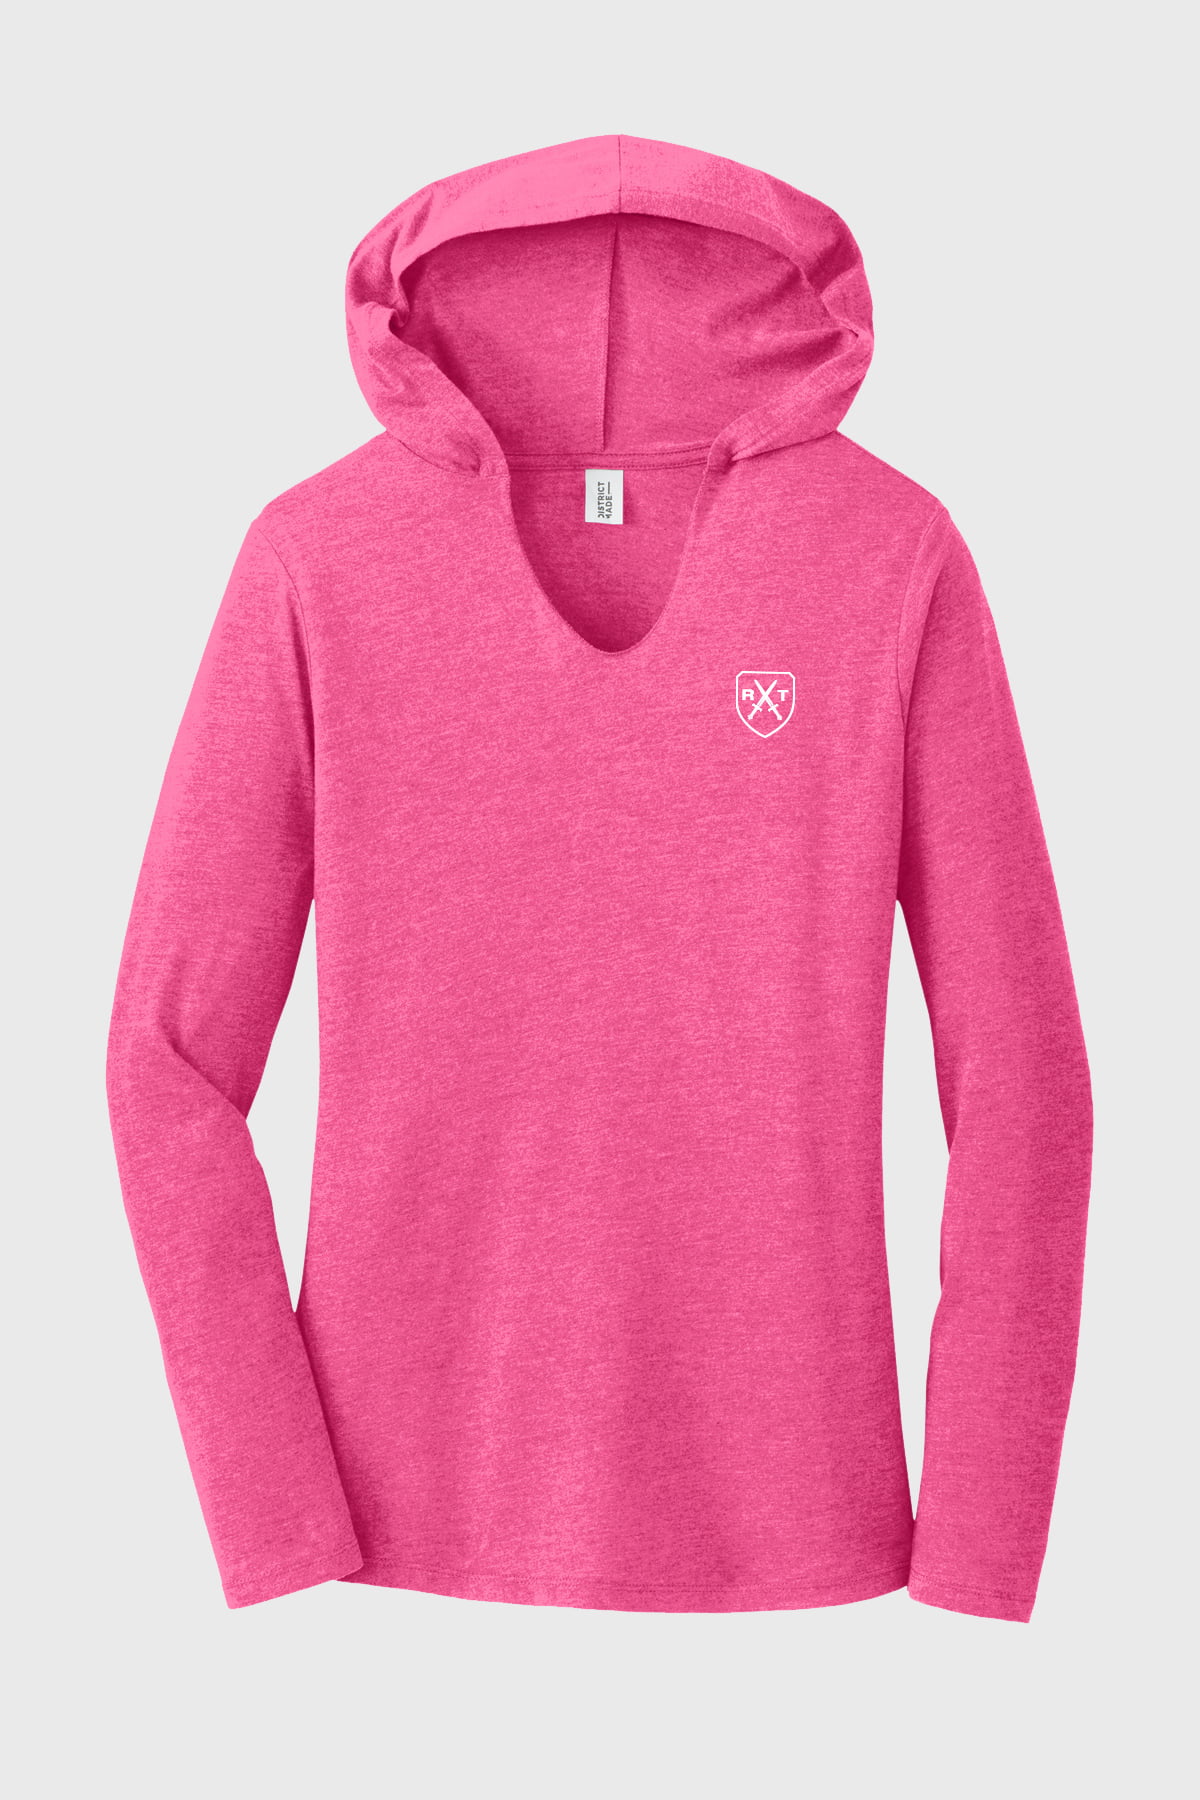 The Cover Me Women’s Hoodie